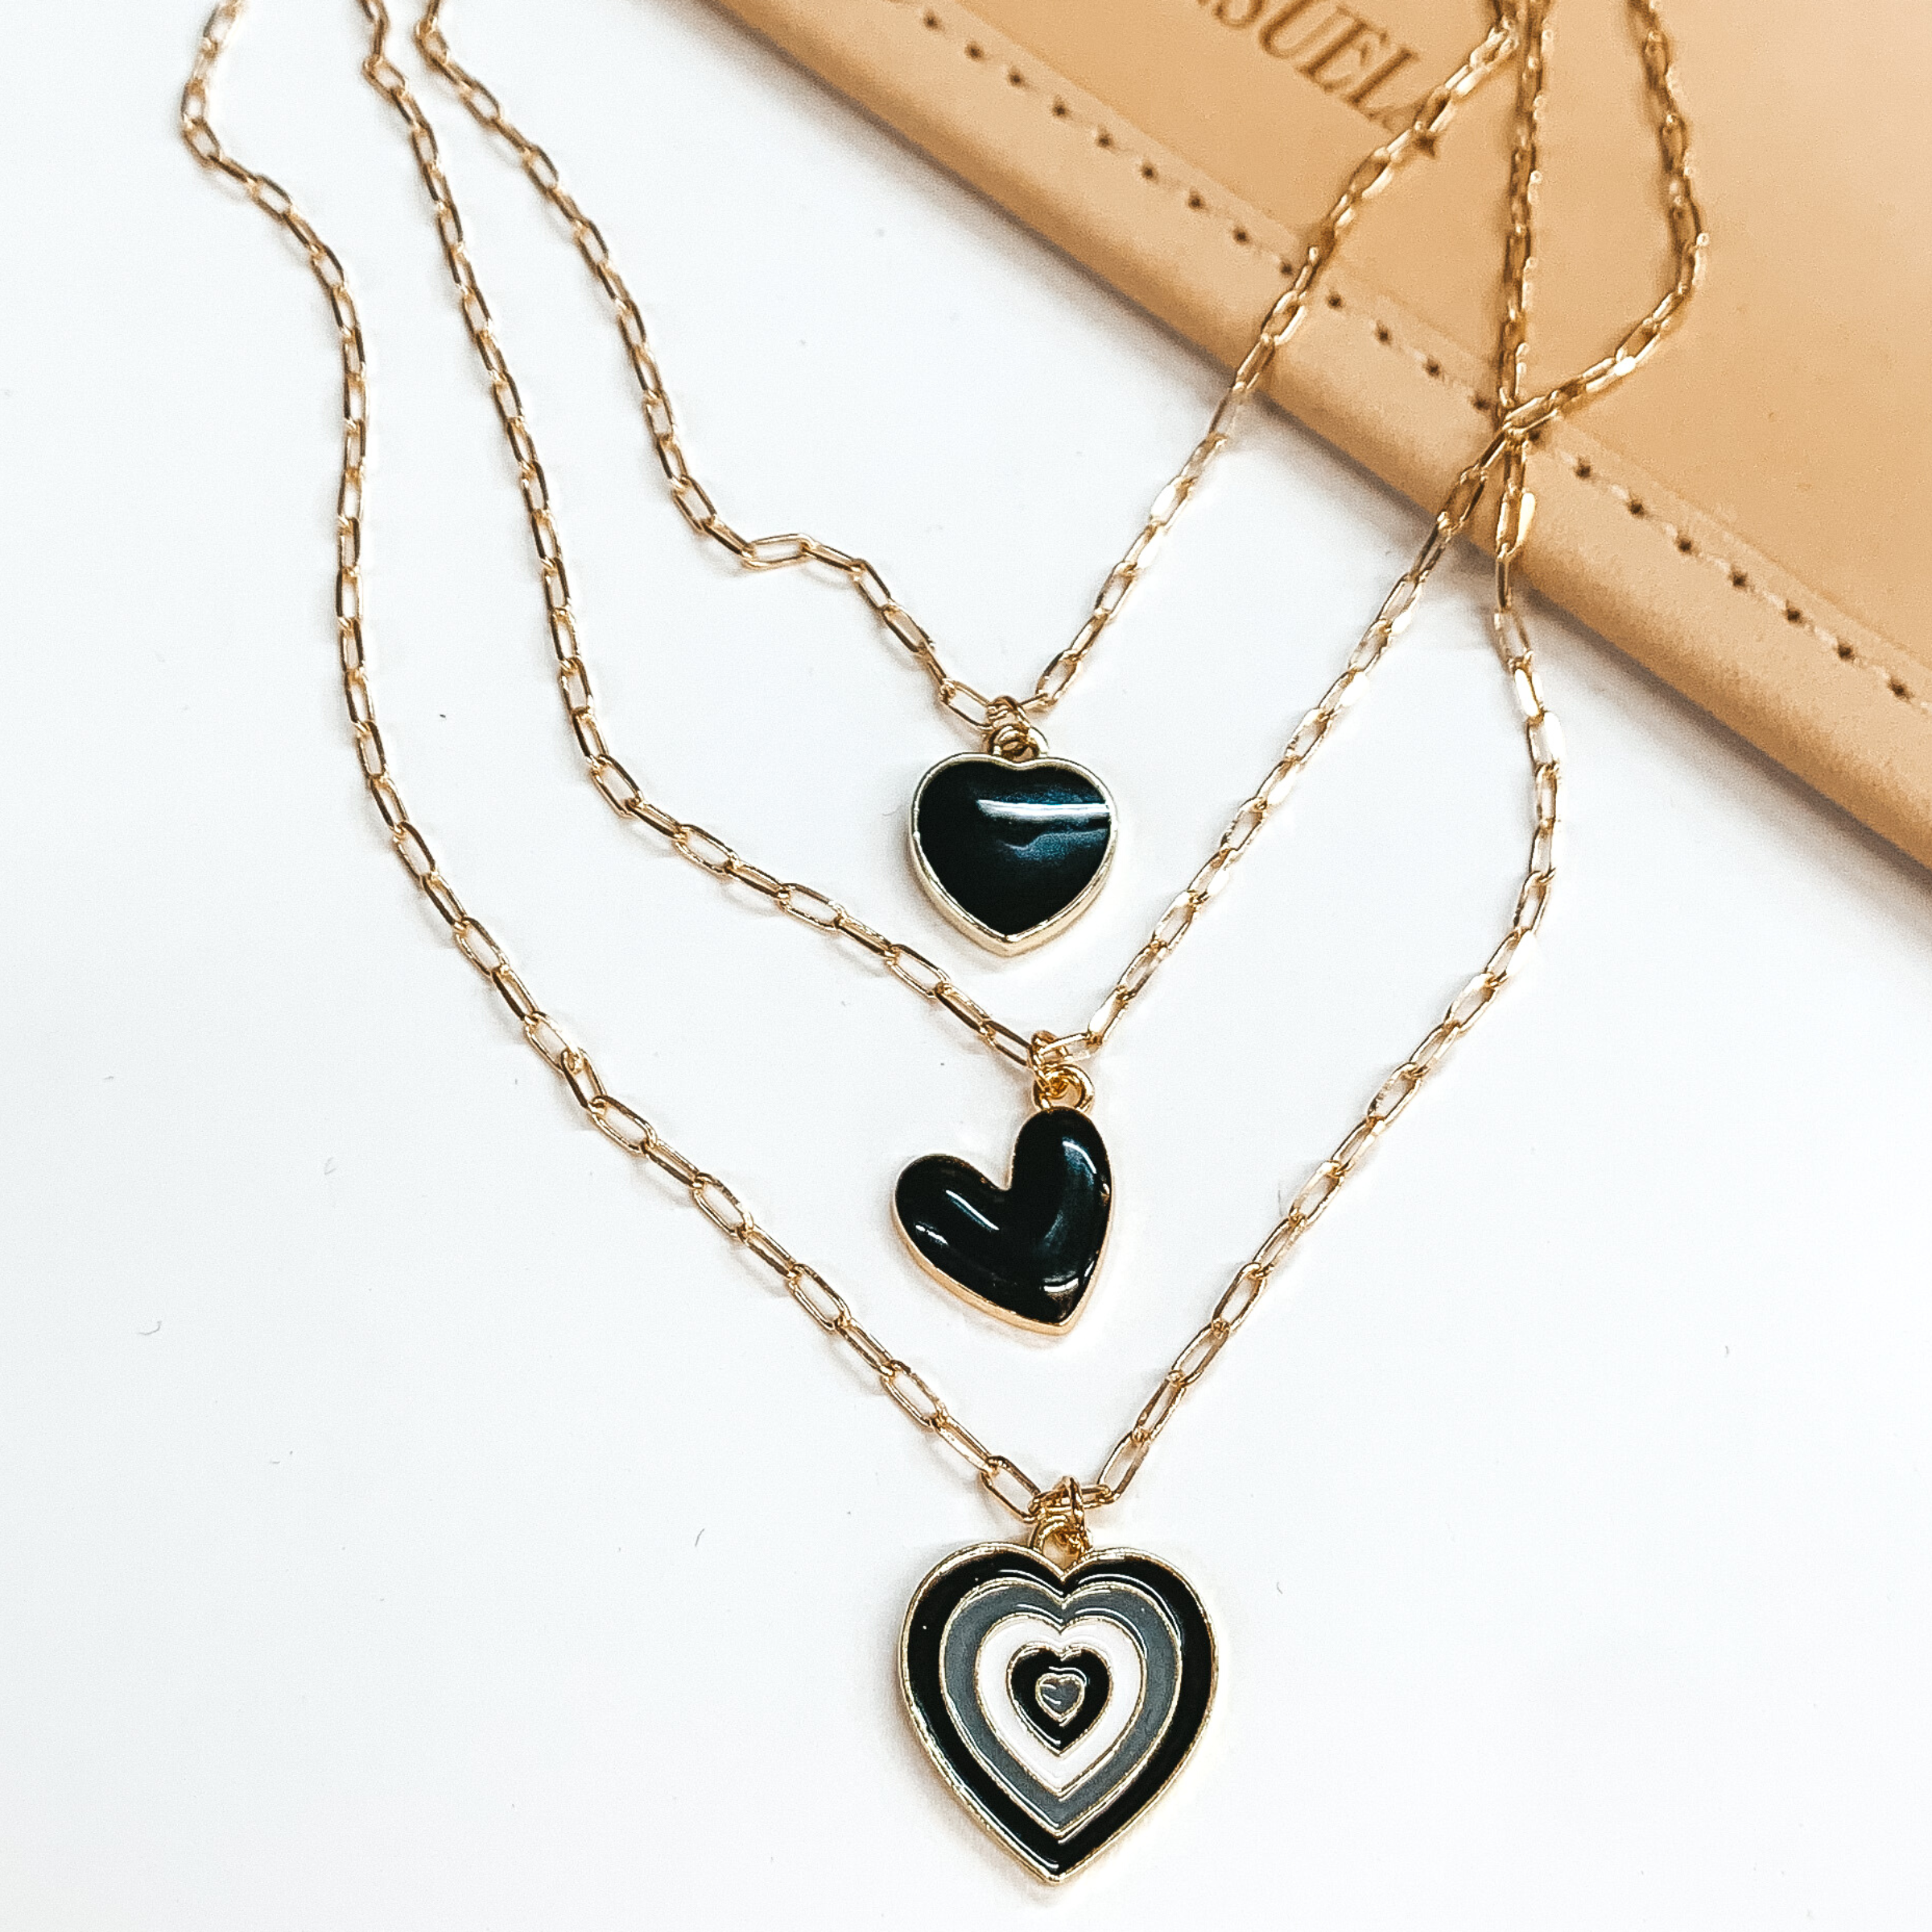 Three stranded gold chain necklace. Each strand has an individual charm in black, white, and/or gold. These include, three heart charms in different sizes. This necklace is pictured partially on a tan bag on a white background. 